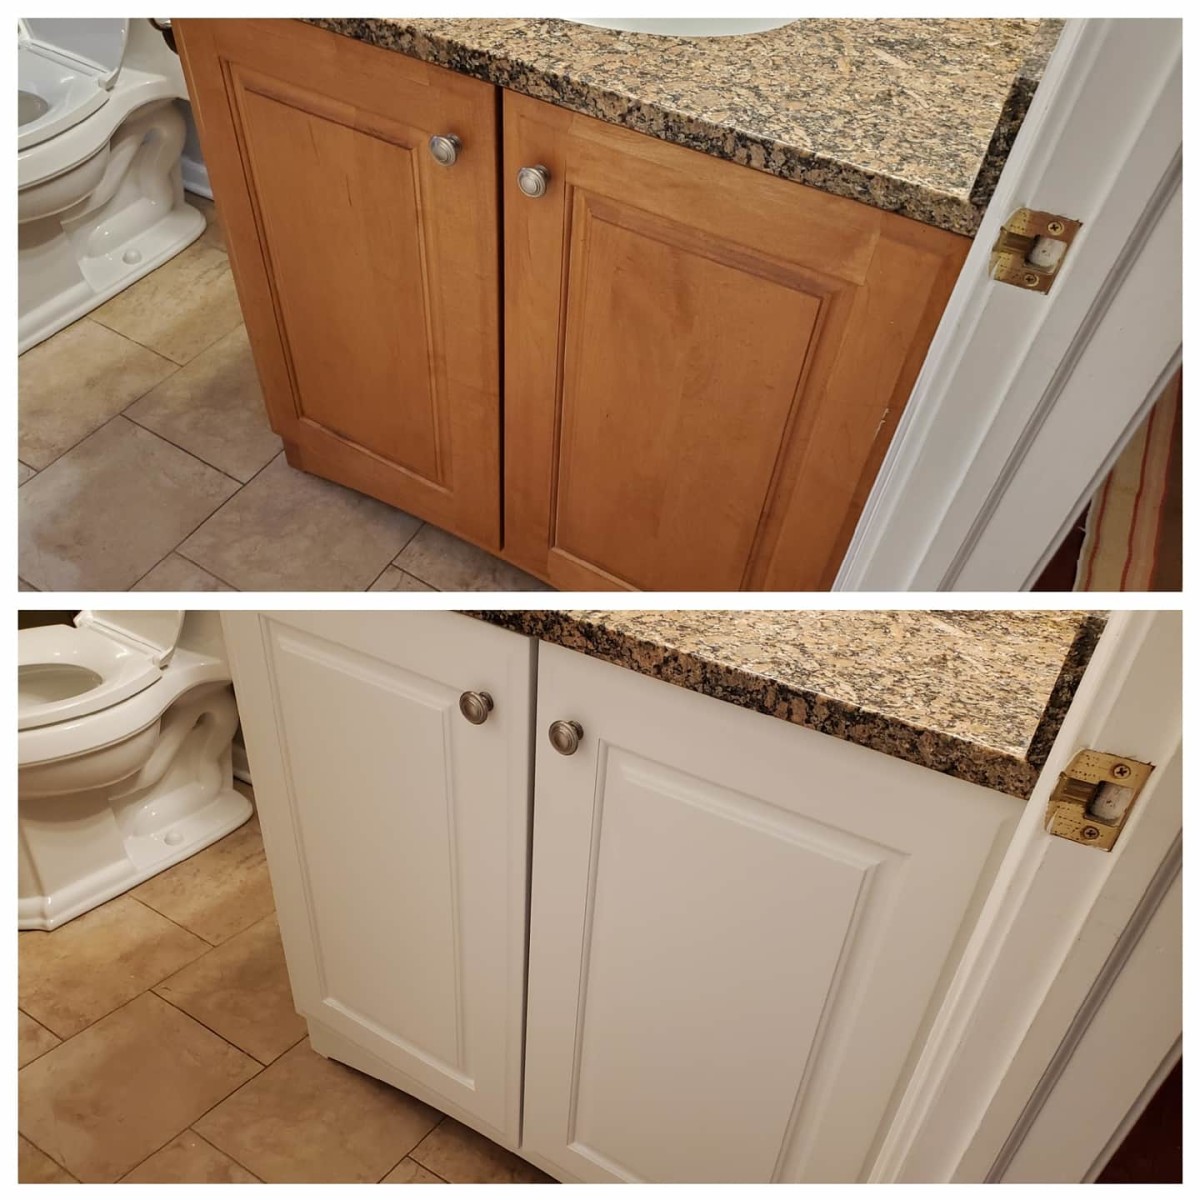 Tips For Painting A Bathroom Vanity, Can I Paint Over A Bathroom Vanity